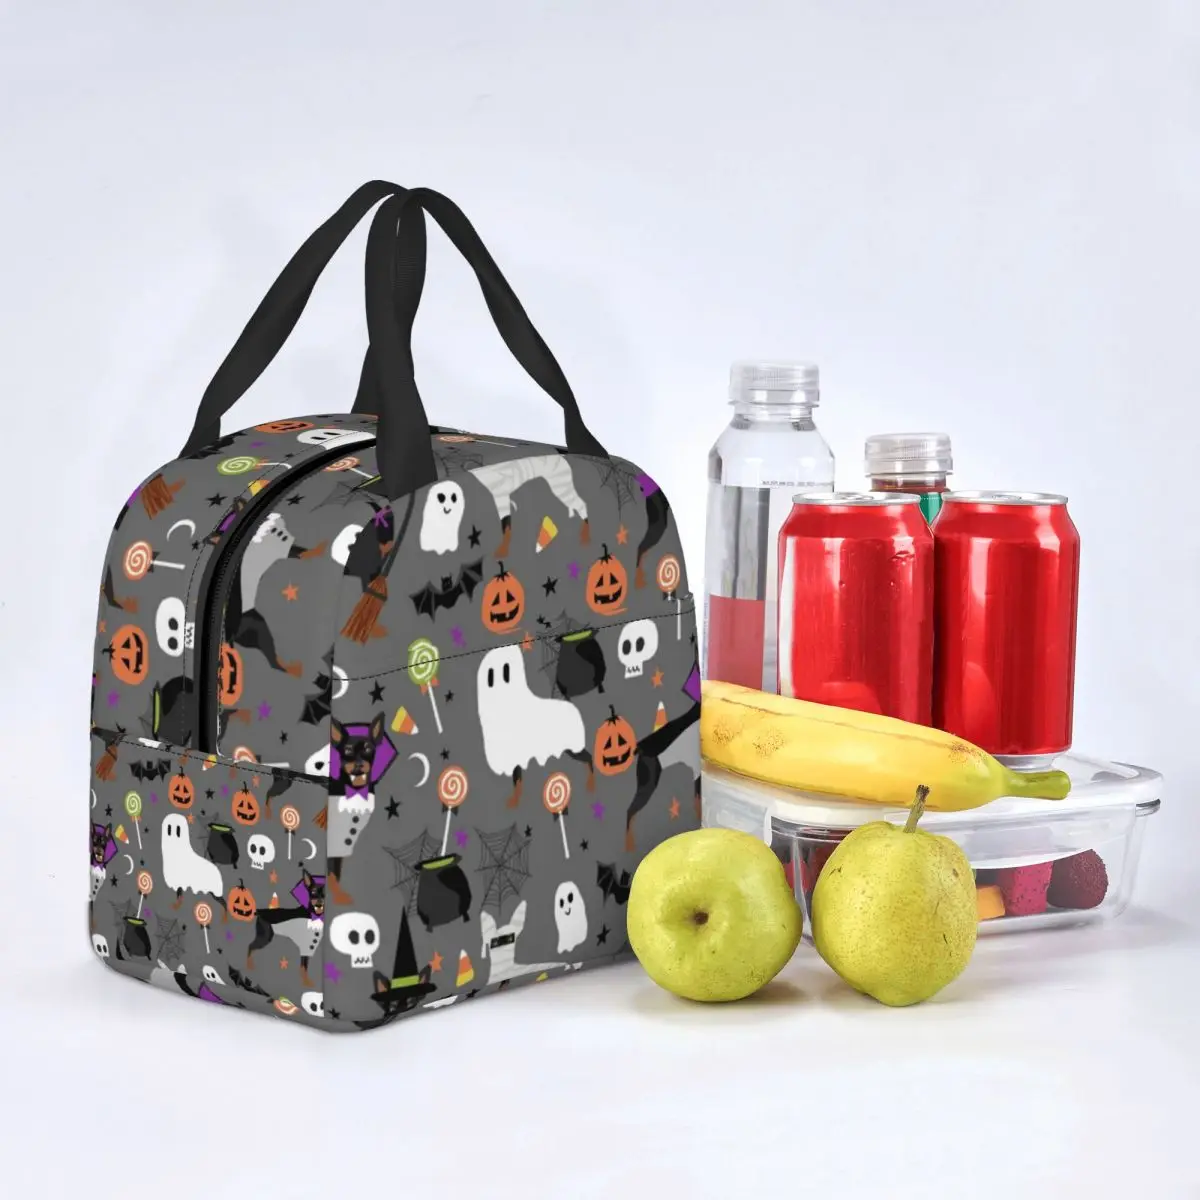 Miniature Doberman Pinscher Halloween Dog Lunch Bag Waterproof Insulated Cooler Bag Thermal Cold Food Picnic Tote for Women Kids